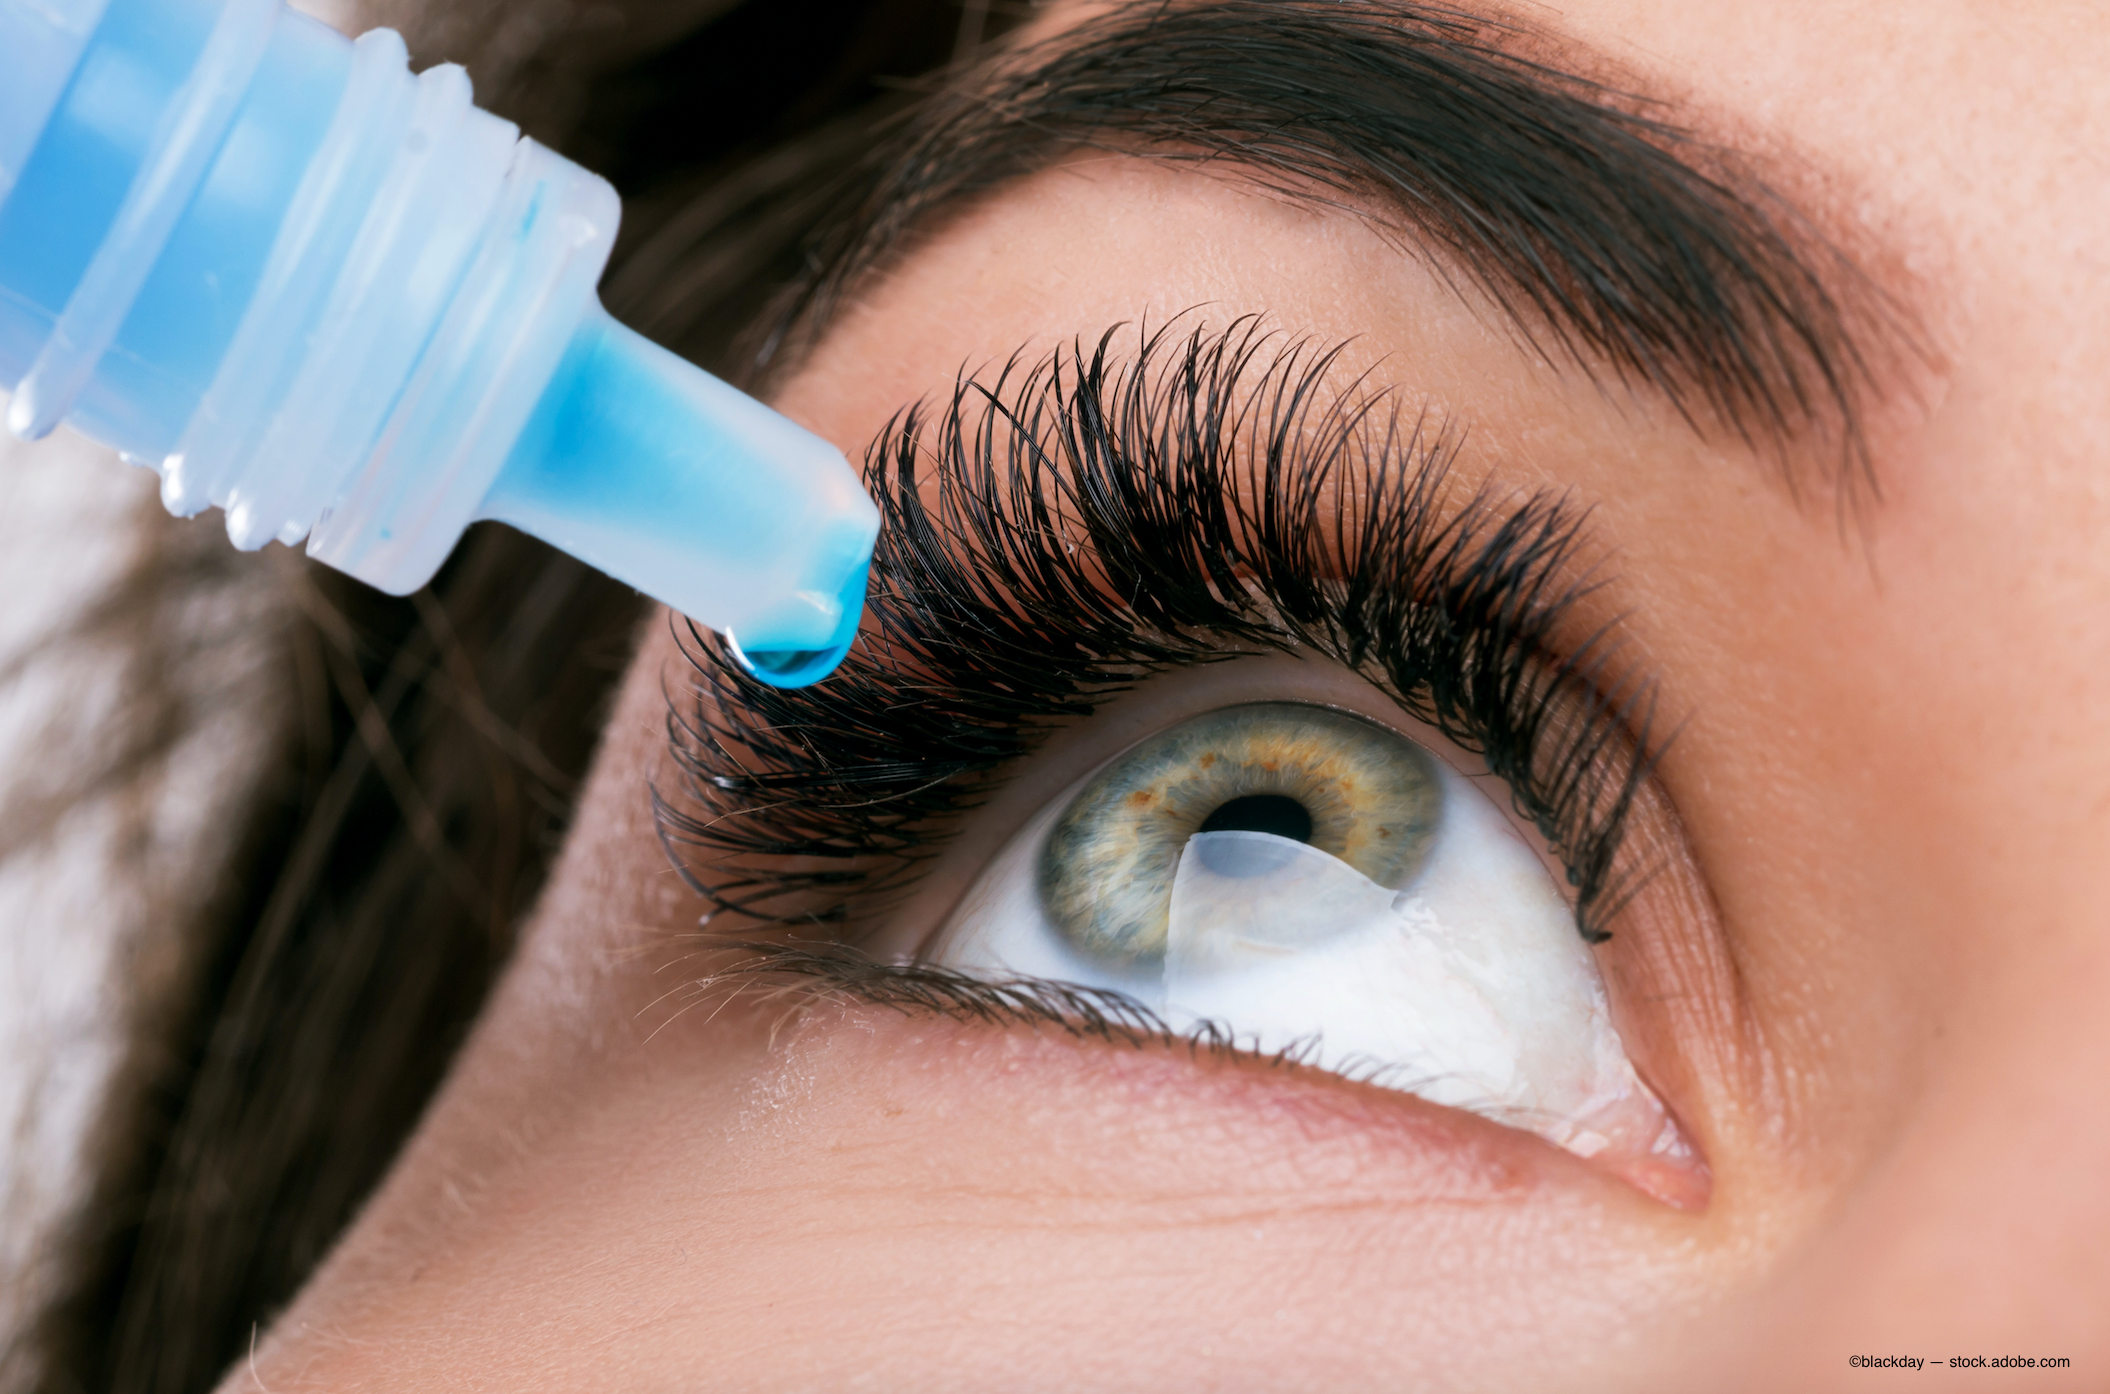 Perfluorohexyloctane ophthalmic solution is the first and only FDA-approved treatment for DED that directly targets tear evaporation. (Image courtesy of Adobe Stock)